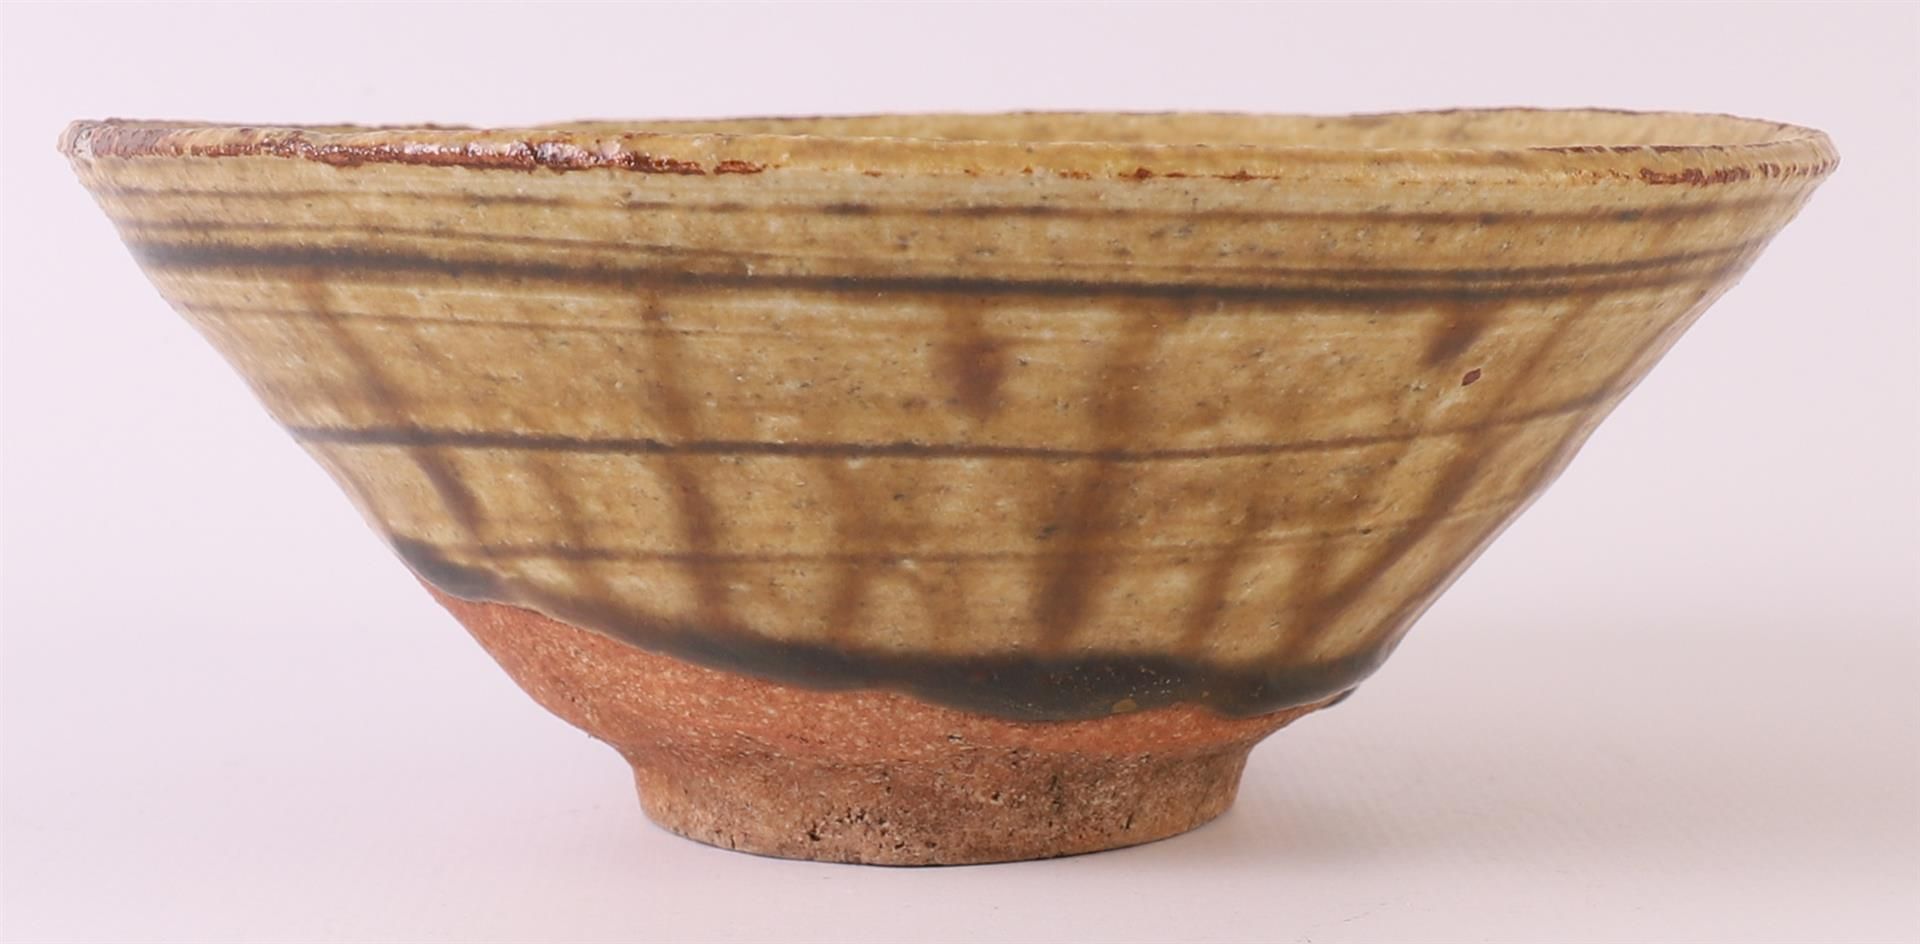 A brown glazed earthenware conical Temmoku bowl, China, Song dynasty - Image 4 of 8